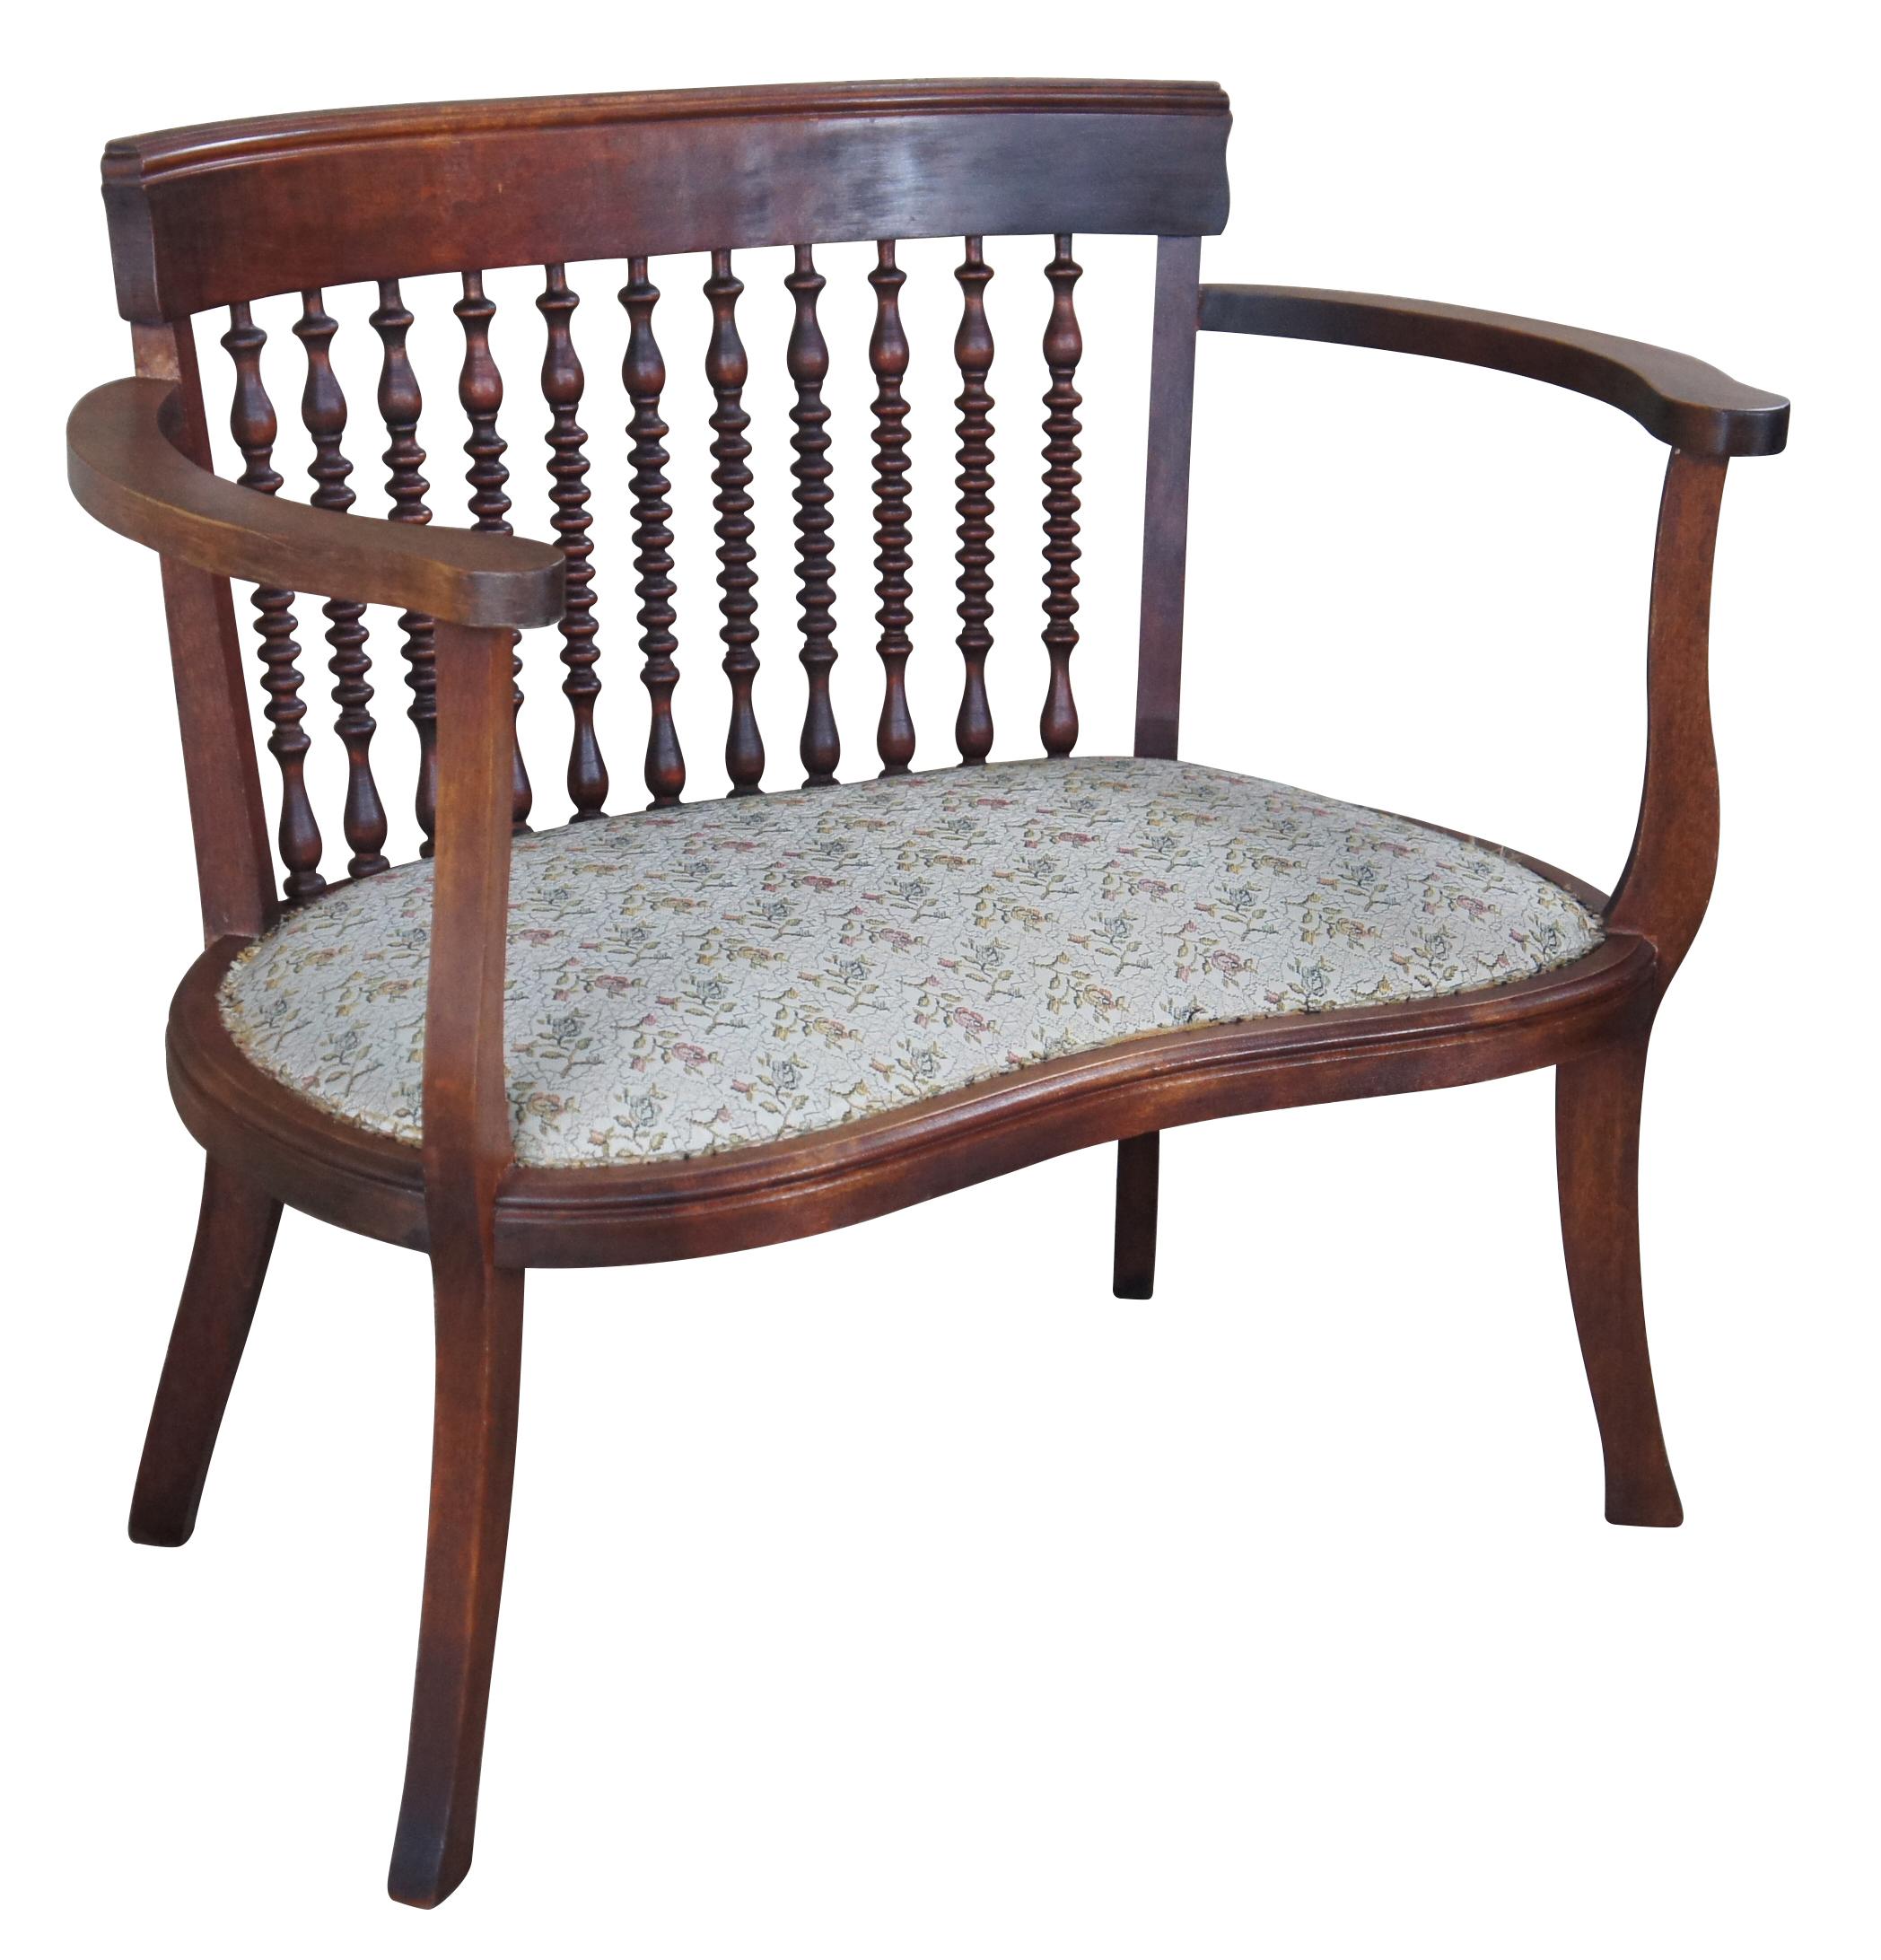 Antique Edwardian Mahogany Spindled Barrel Back Kidney Shaped Floral Seat Settee In Good Condition For Sale In Dayton, OH